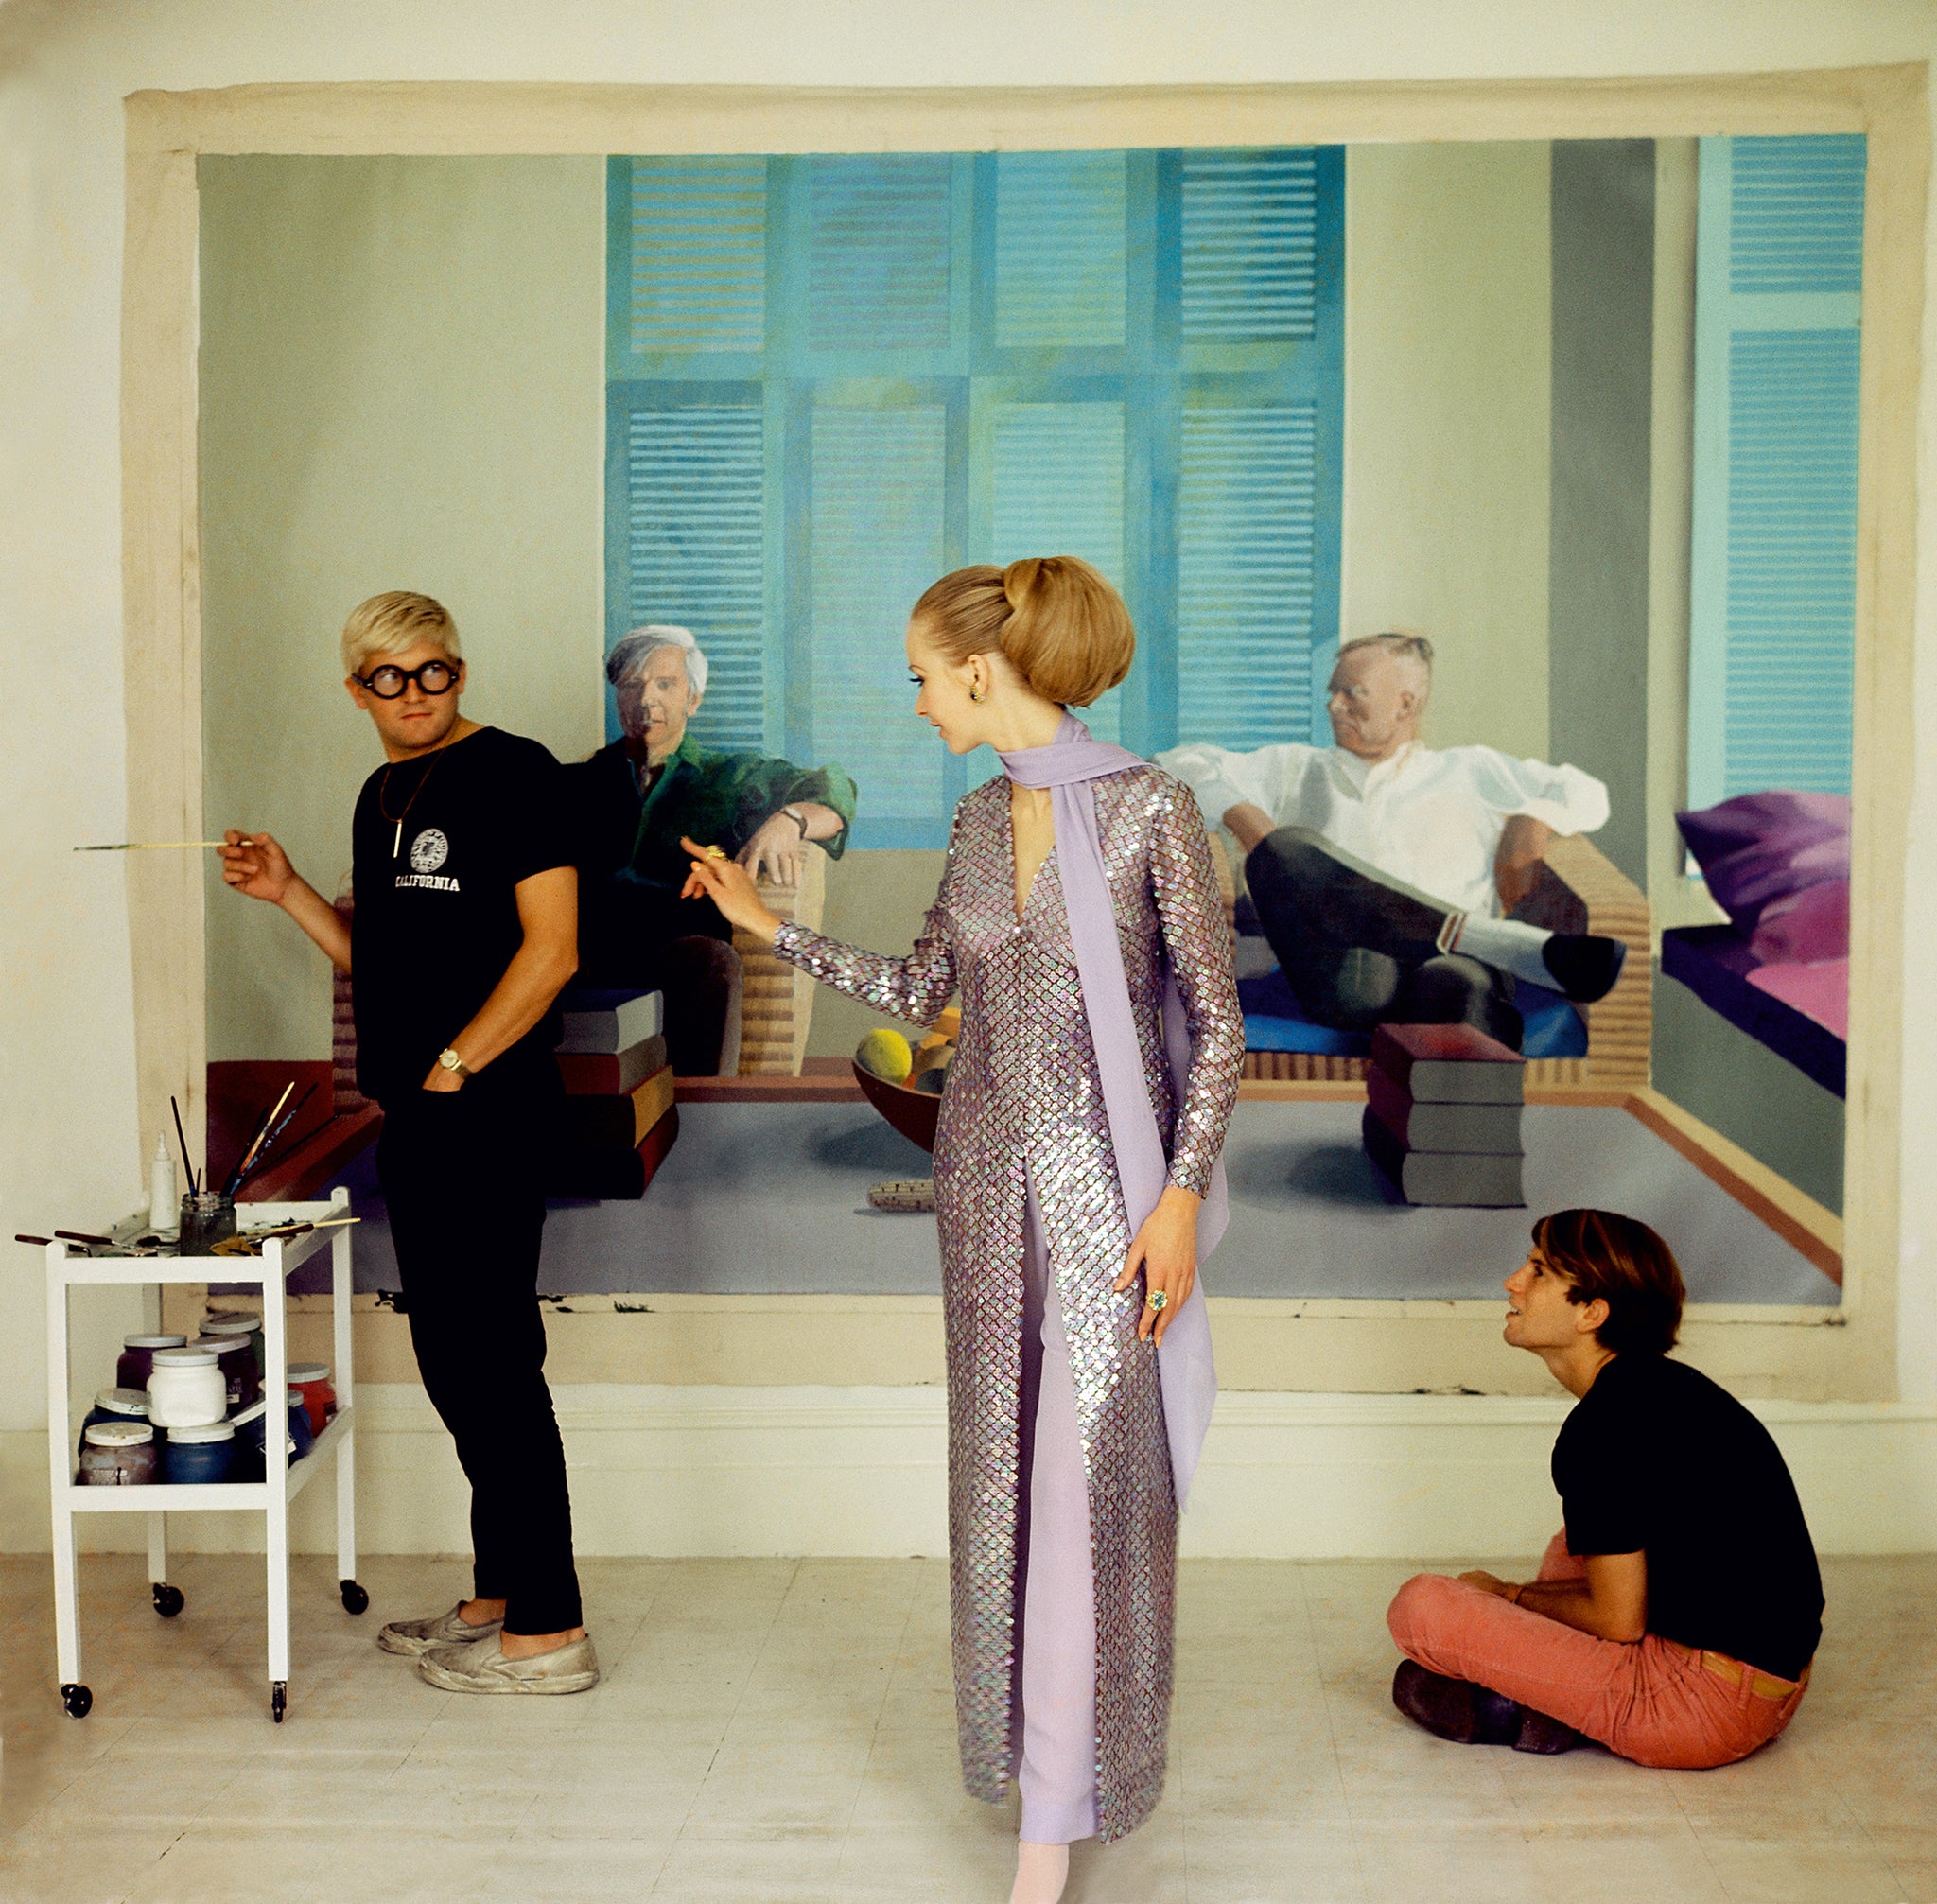 David Hockney with model Maudie James and photographer Peter Schlesinger in an image from the National Portrait Gallery’s forthcoming ‘Vogue 100: A Century of Style’ exhibition